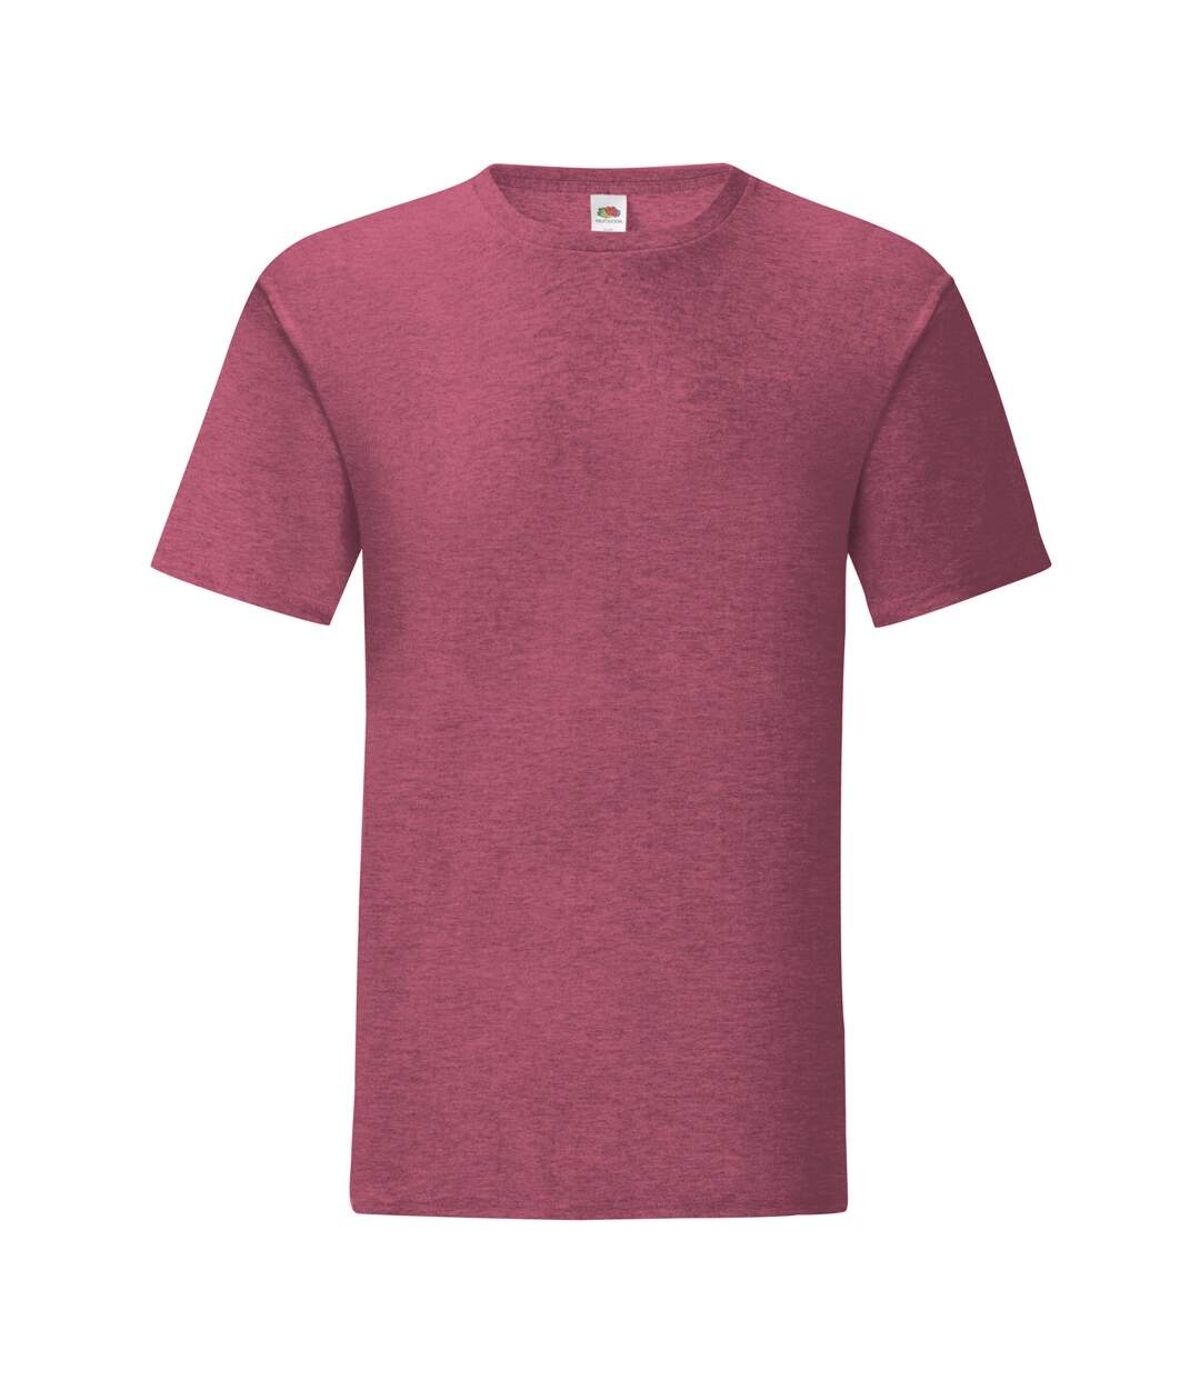 Fruit Of The Loom Mens Iconic T-Shirt (Pack of 5) (Heather Burgundy)